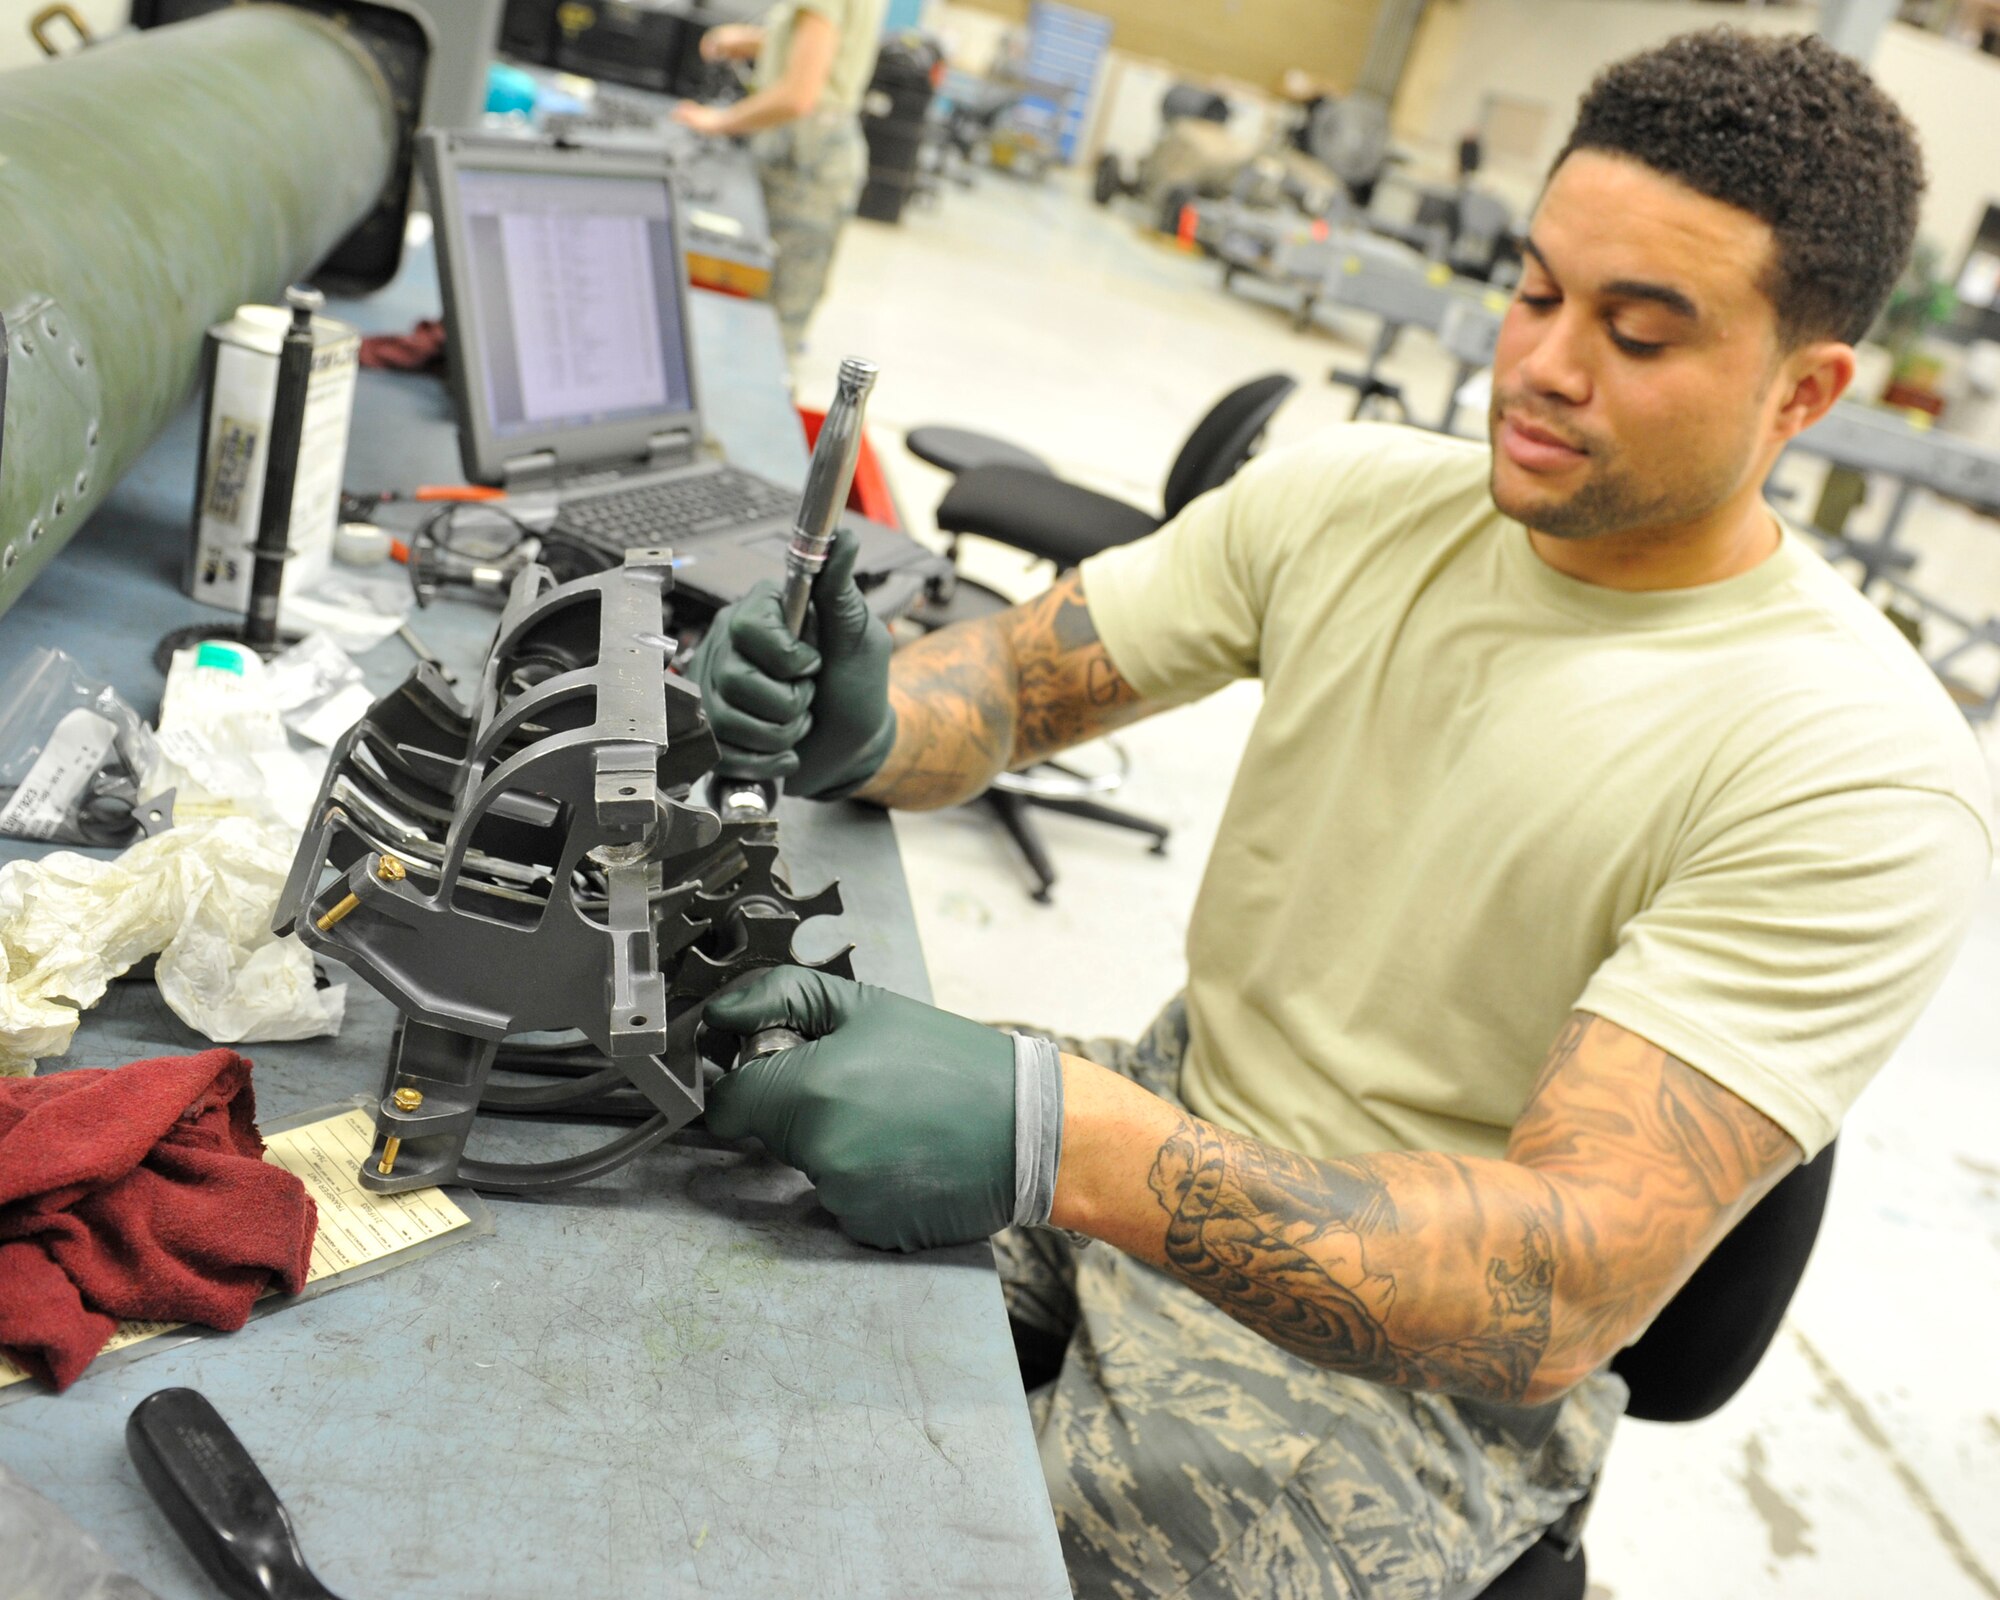 Staff Sgt. Jacorey Burbank, 56th Equipment Maintenance Squadron armament flight supervisor, completes the reassembly of an M61A1 gun transfer unit June 28, 2017 at Luke Air Force Base, Ariz. The Transfer unit transfers the rounds from the handling system to the gun system. (U.S. Air Force photo by Airman 1st Class Pedro Mota)